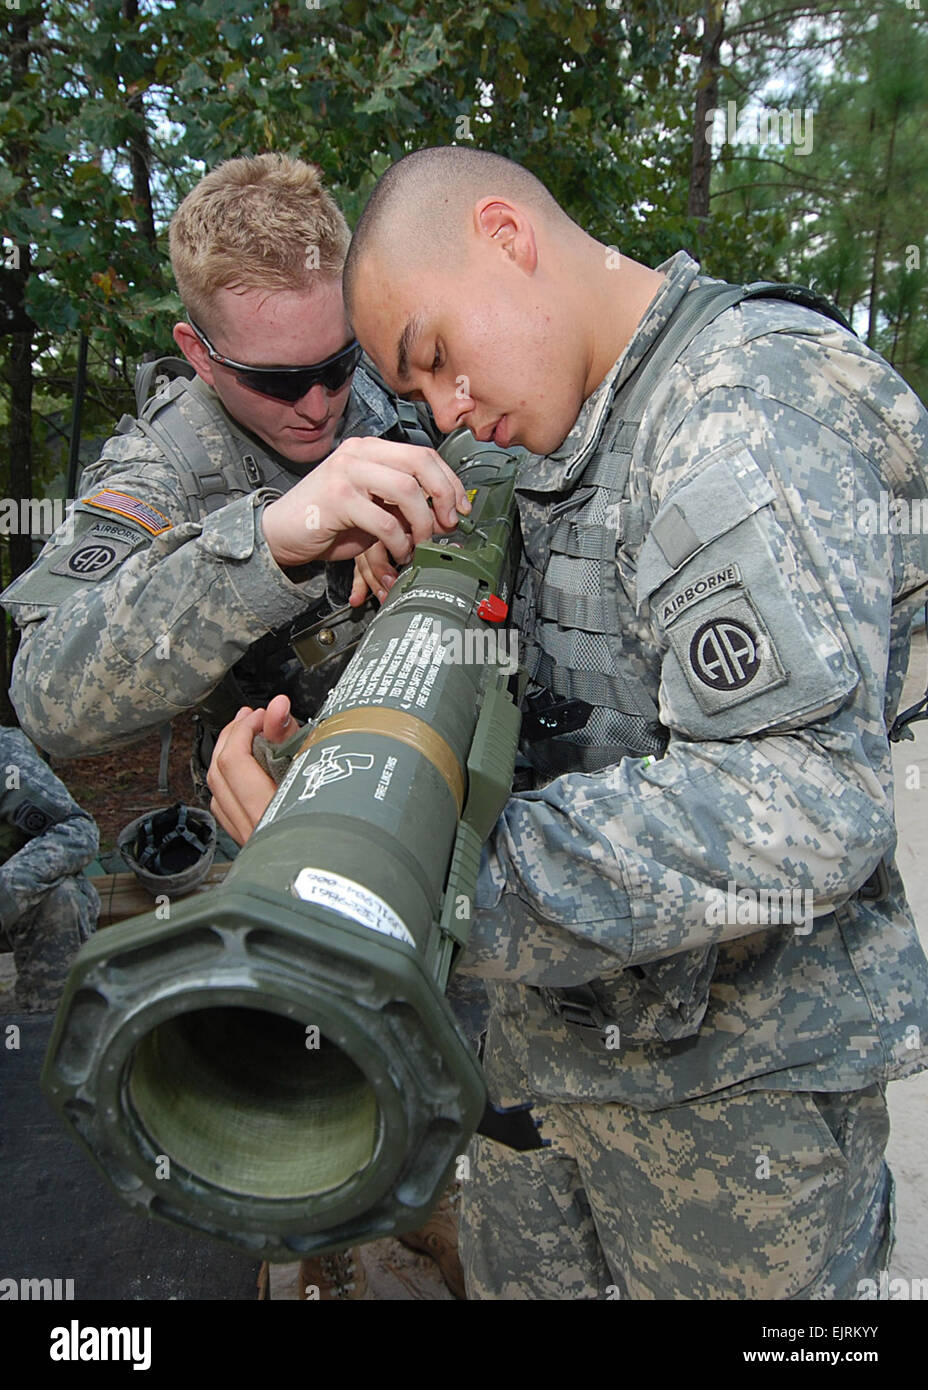 Spc. Alex Raske left, of Company A, 2nd Battalion, 325th Airborne Infantry Regiment, 2nd Brigade Combat Team, 82nd Airborne Division, and Pfc. Phillip Nelson, of Rockville, Md., get familiar with the M136 AT4 anti-tank weapon during practice for the Expert Infantryman Badge at Fort Bragg Sep. 15.   Staff Sgt. Mike Pryor, 2nd BCT, 82nd Abn. Div. Public Affairs Stock Photo